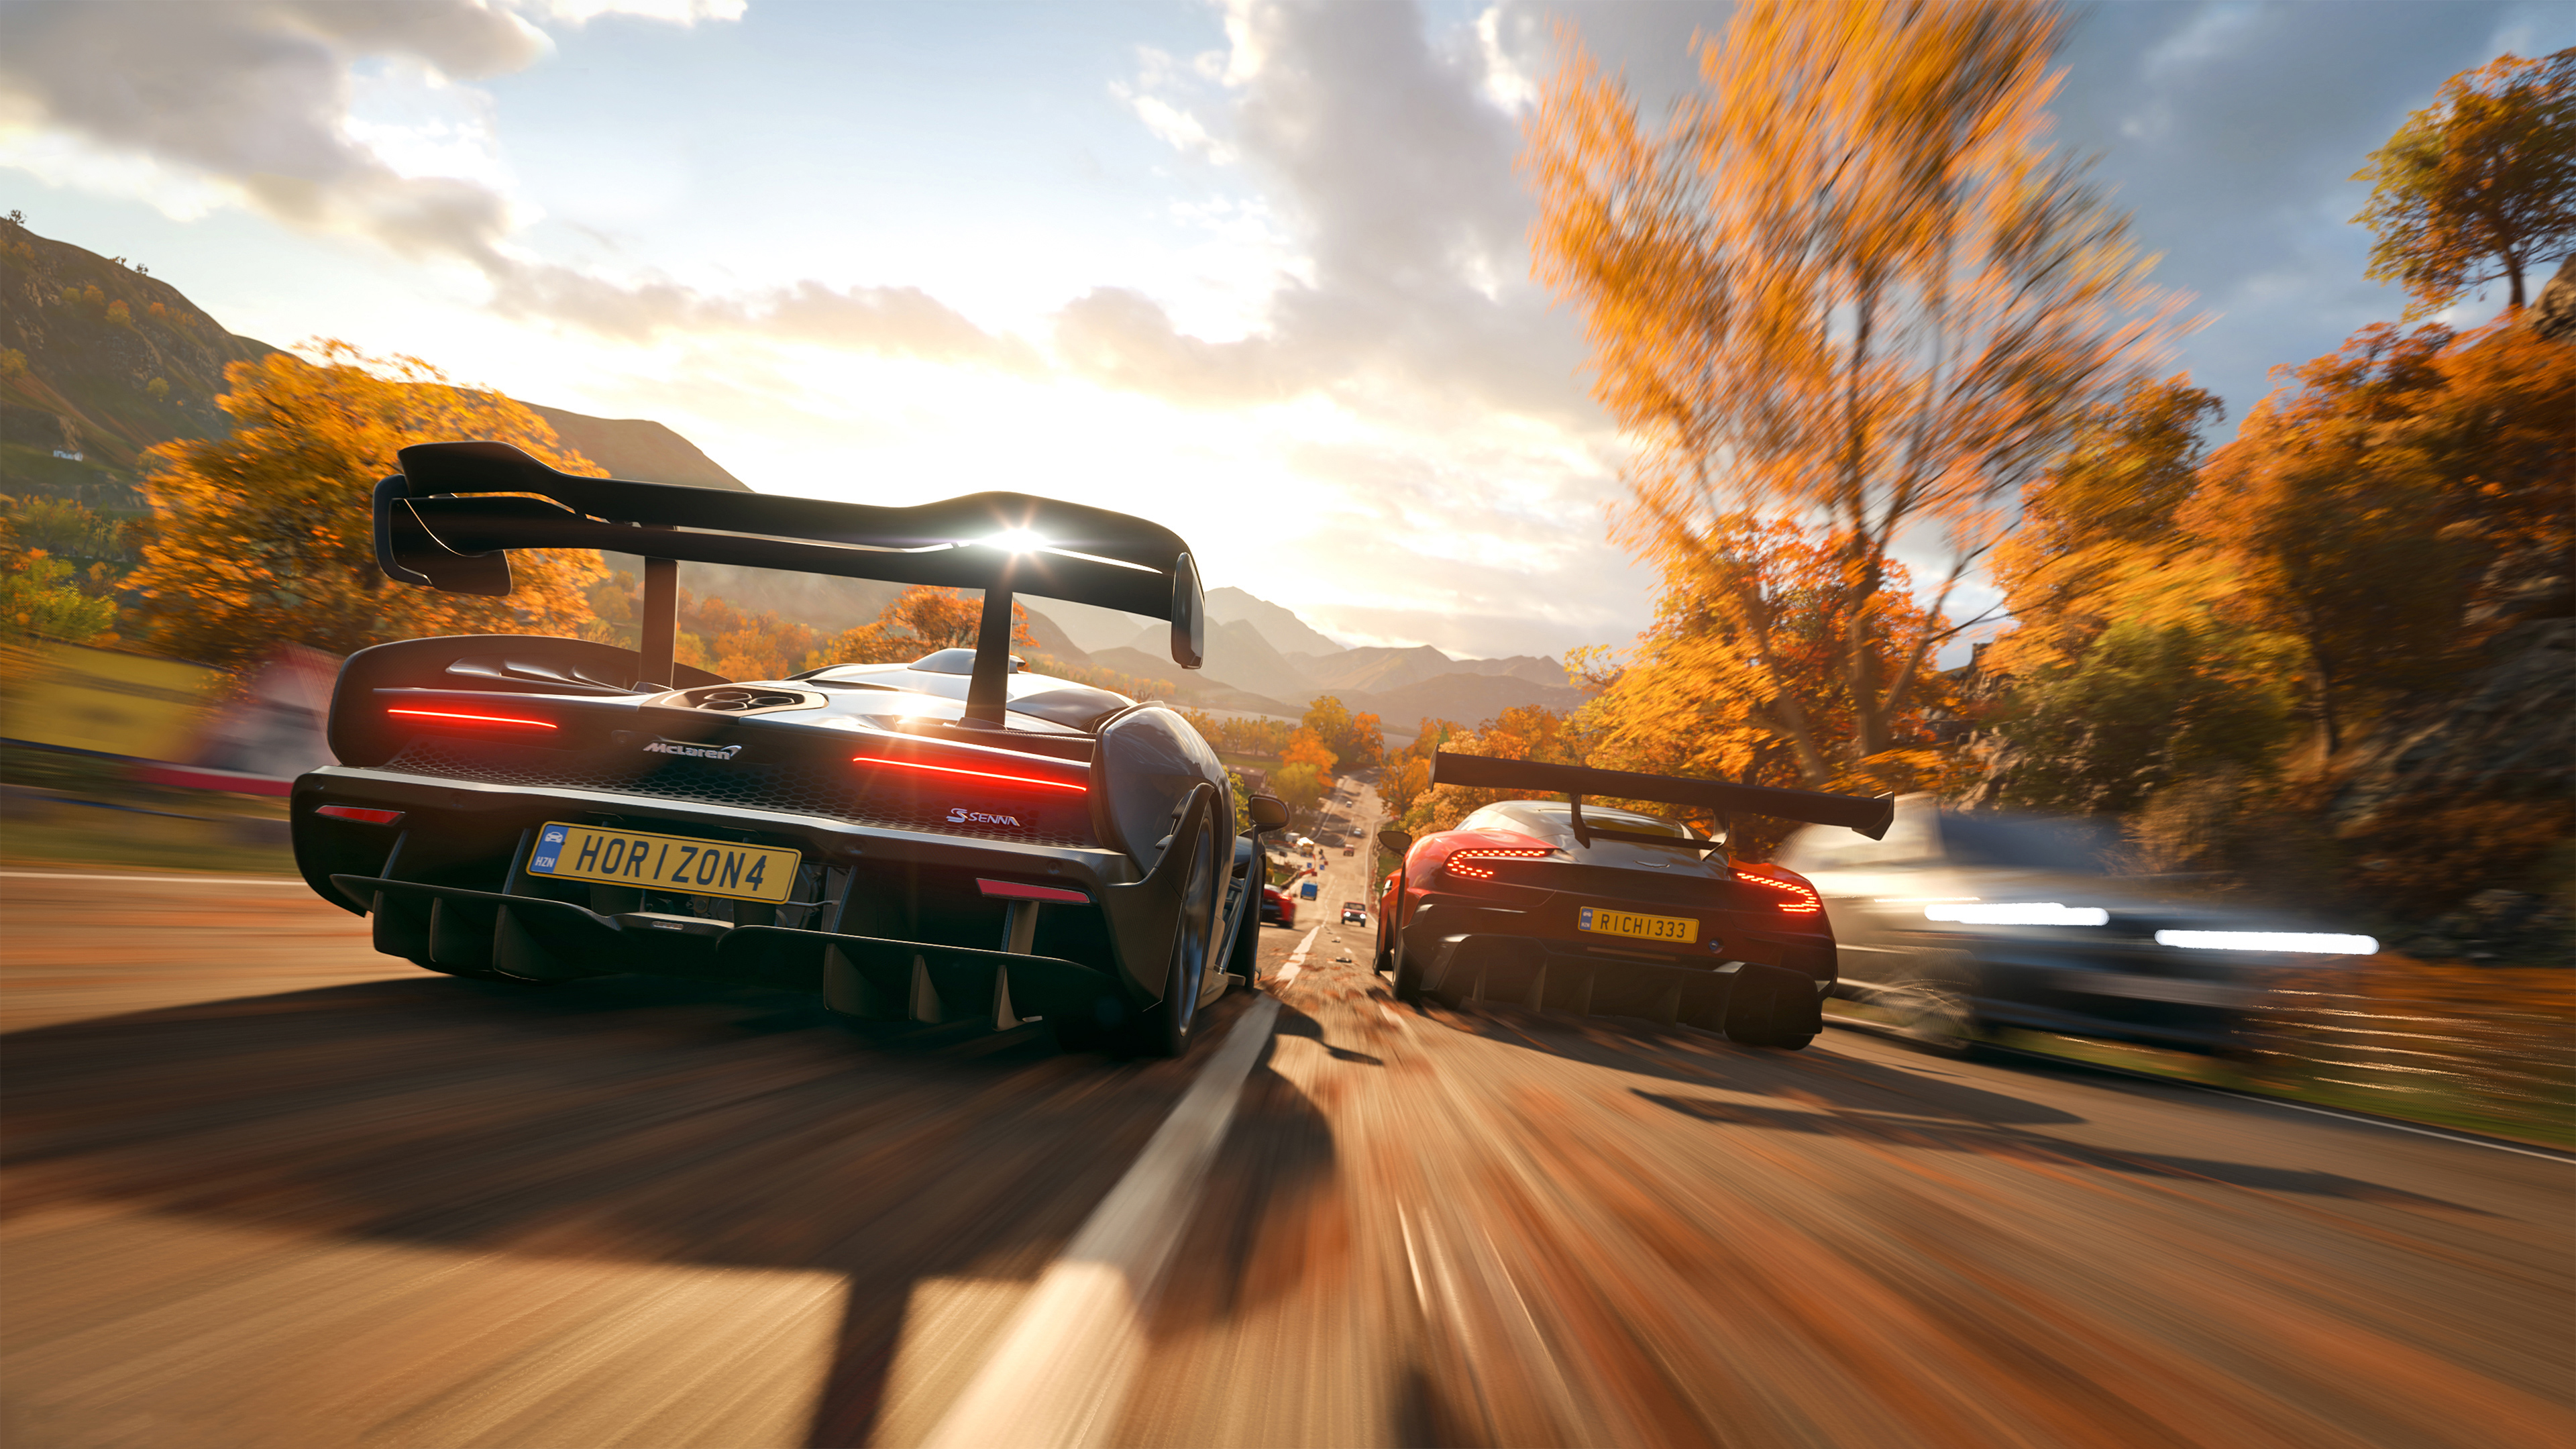 4k Forza Horizon 4, HD Games, 4k Wallpapers, Images, Backgrounds